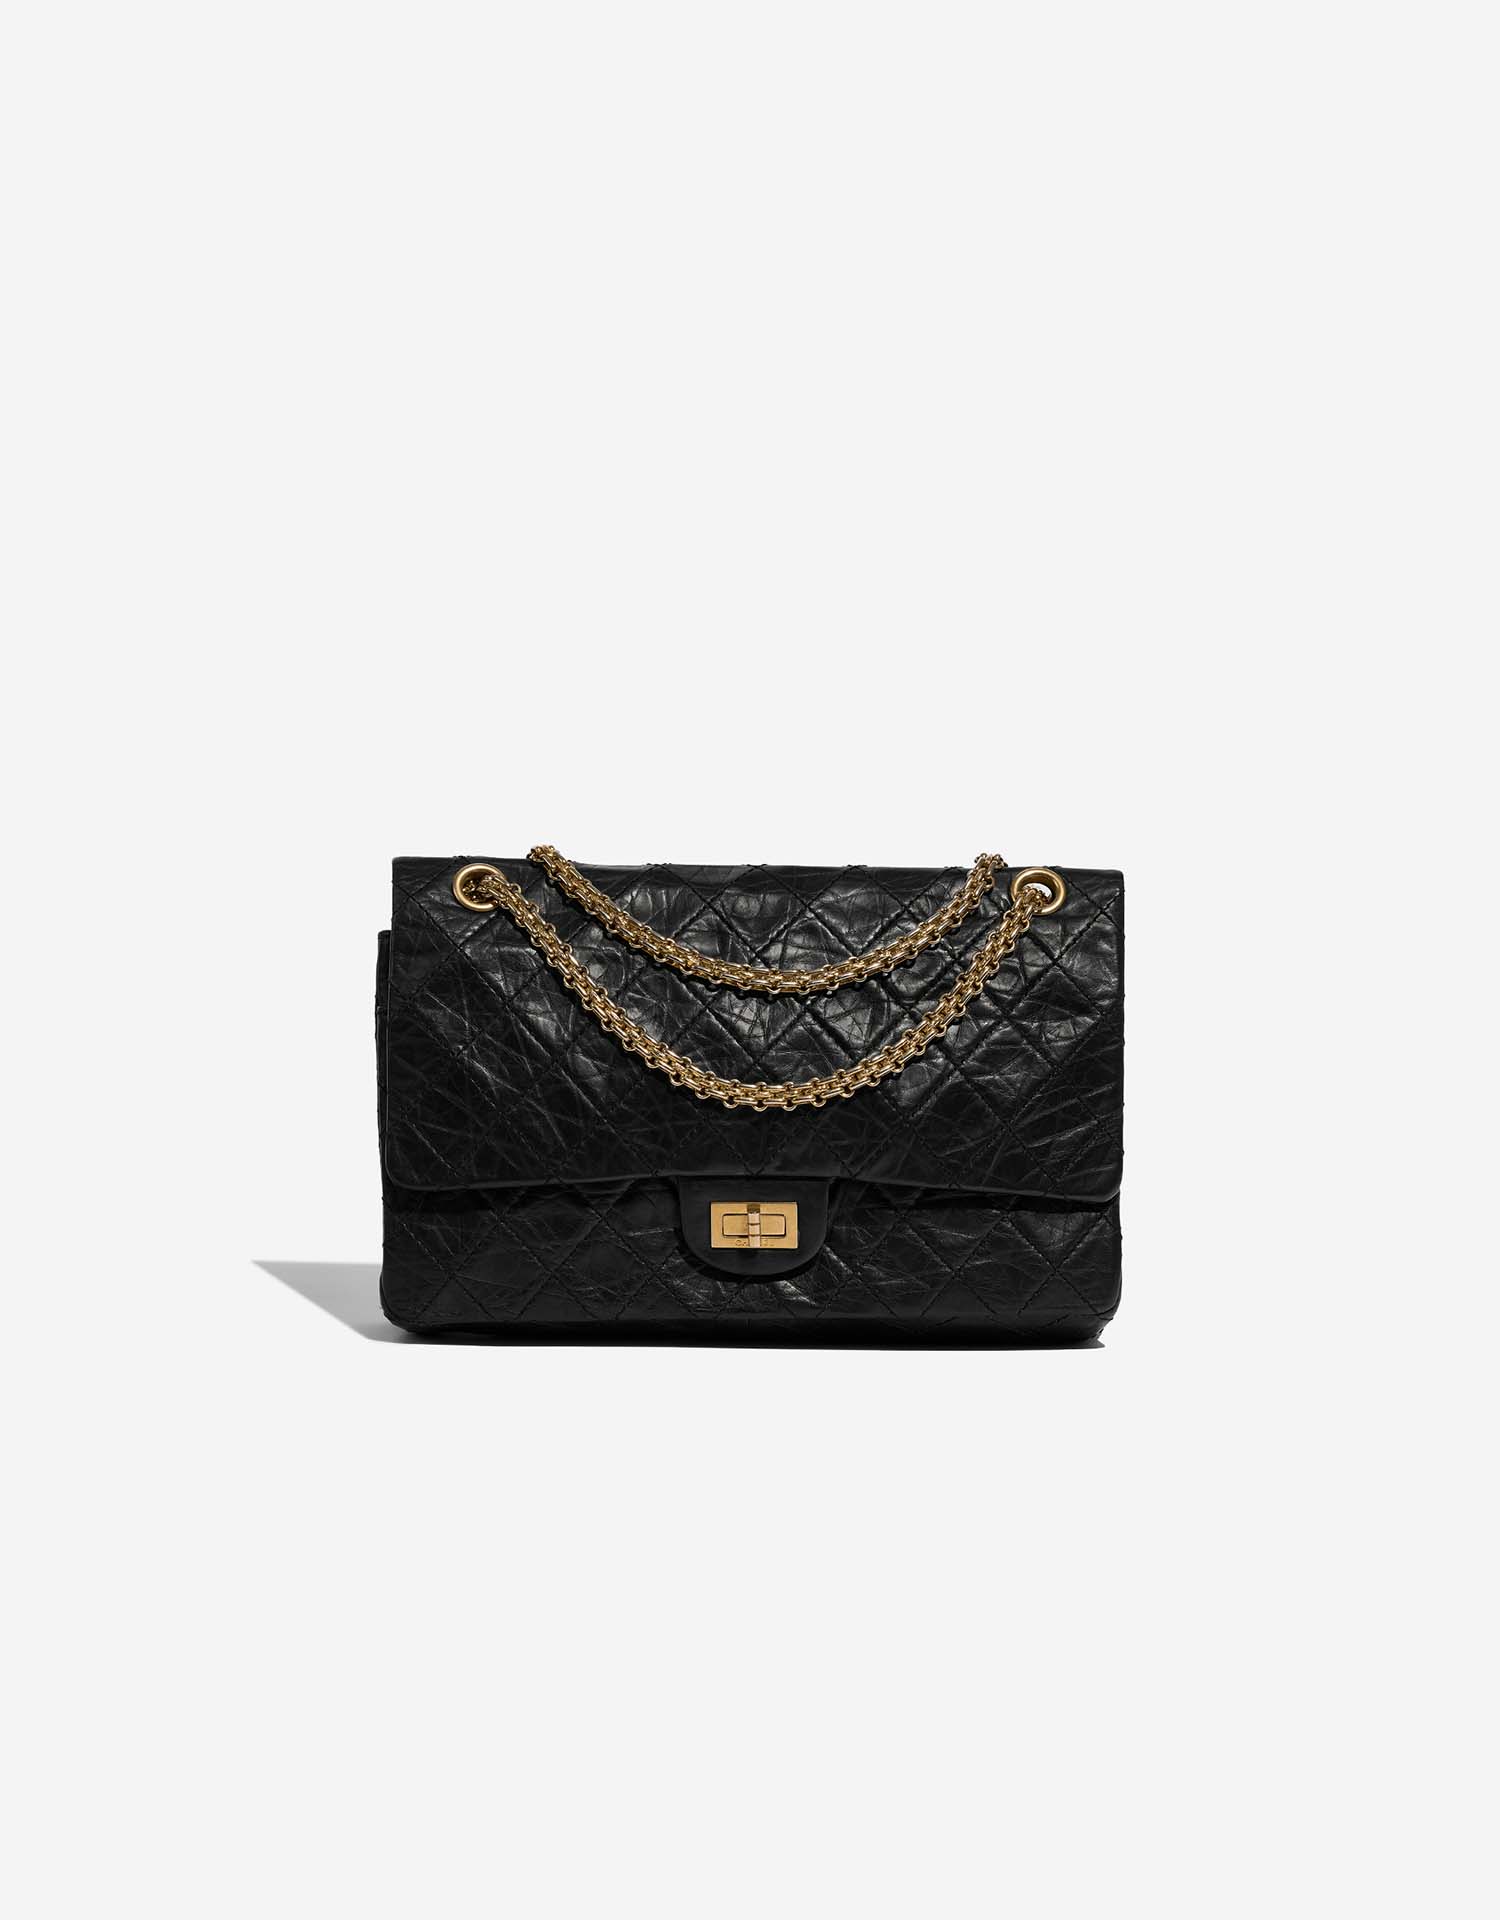 Shop authentic new, pre-owned, vintage CHANEL handbags - Timeless